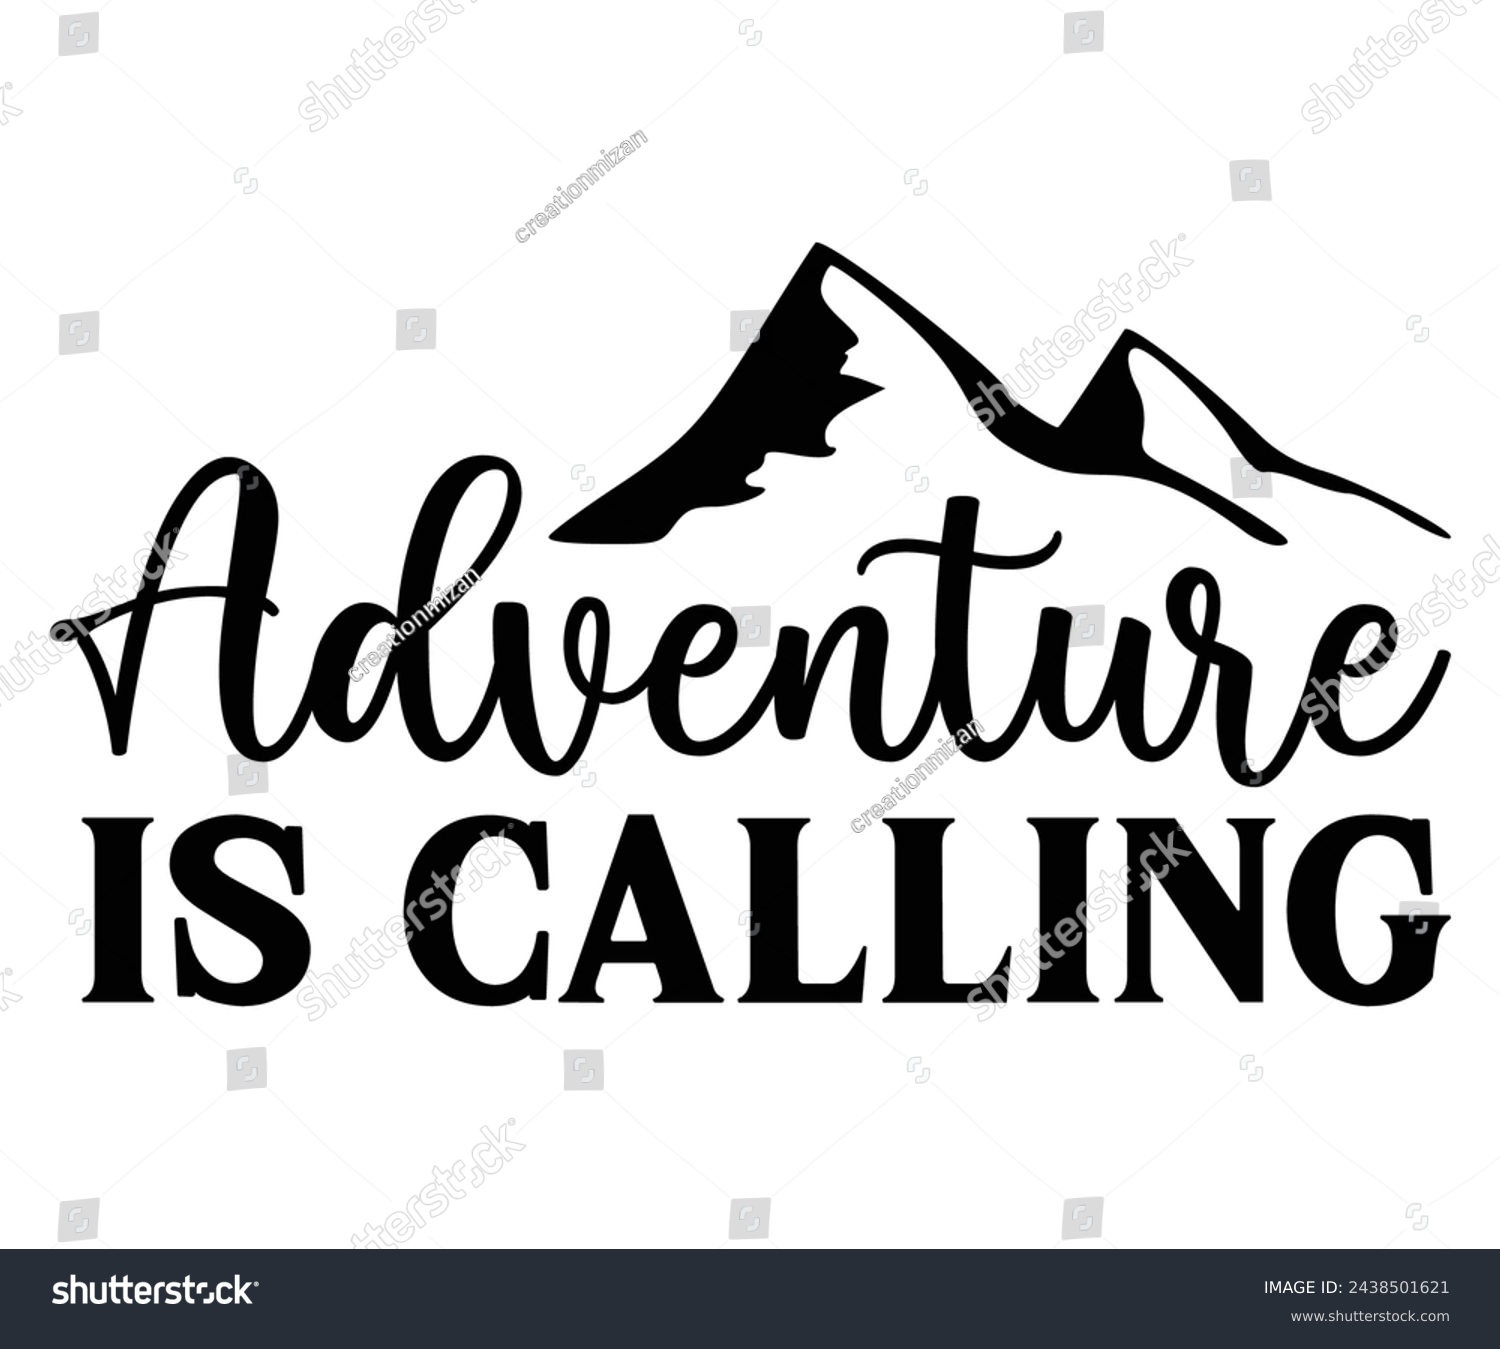 SVG of Adventure Is Calling Svg,Camping Svg,Hiking,Funny Camping,Adventure,Summer Camp,Happy Camper,Camp Life,Camp Saying,Camping Shirt svg